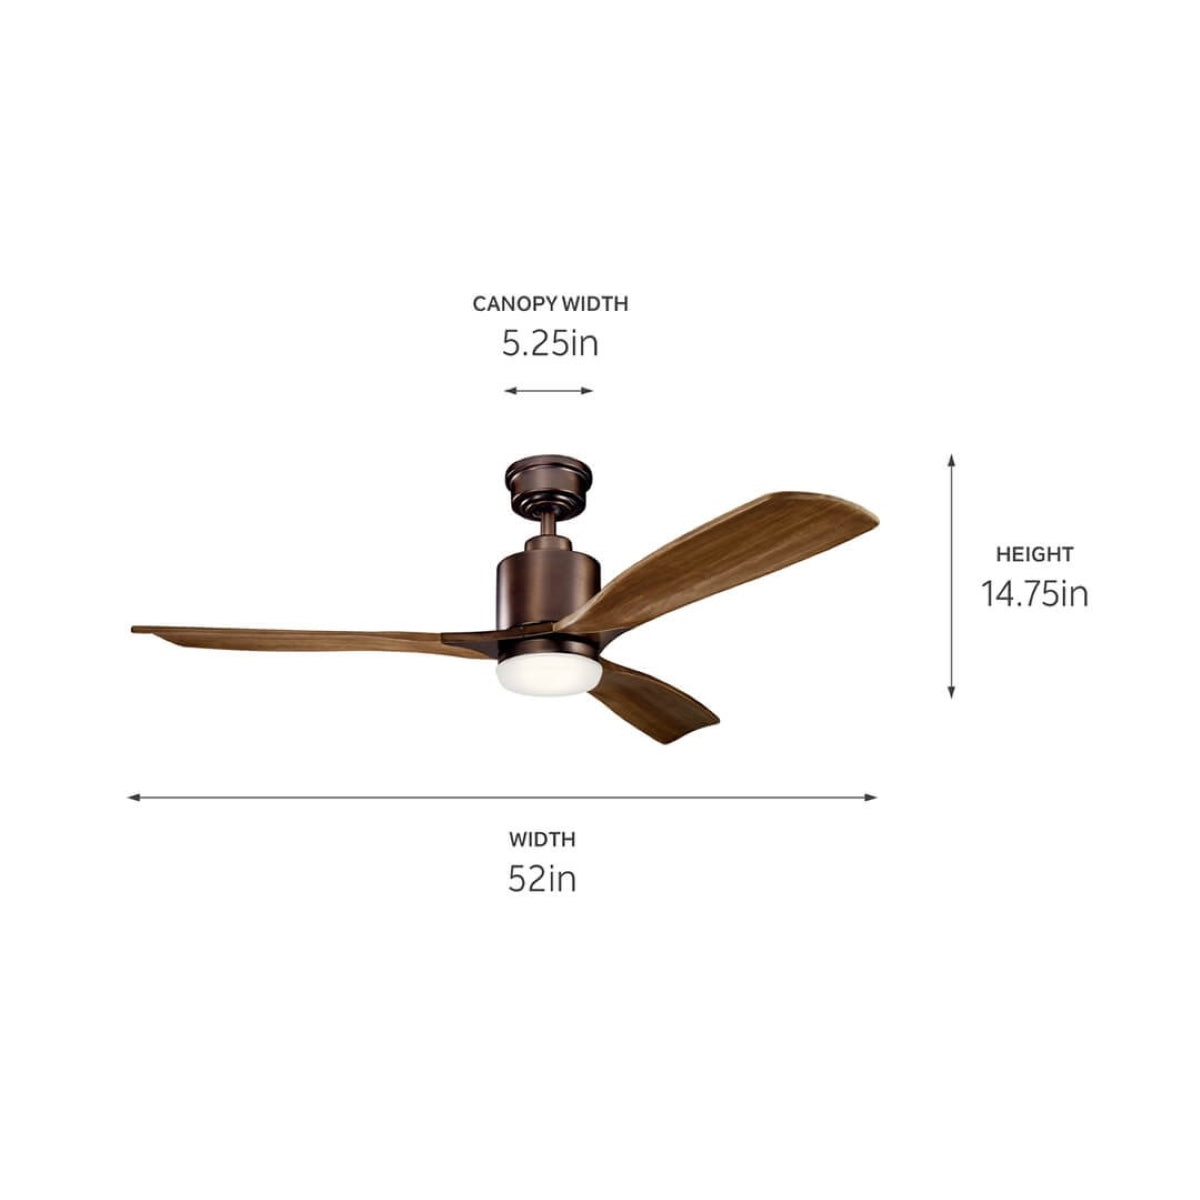 Ridley Ii 52 Inch Propeller Ceiling Fan With Light, Wall Control Included